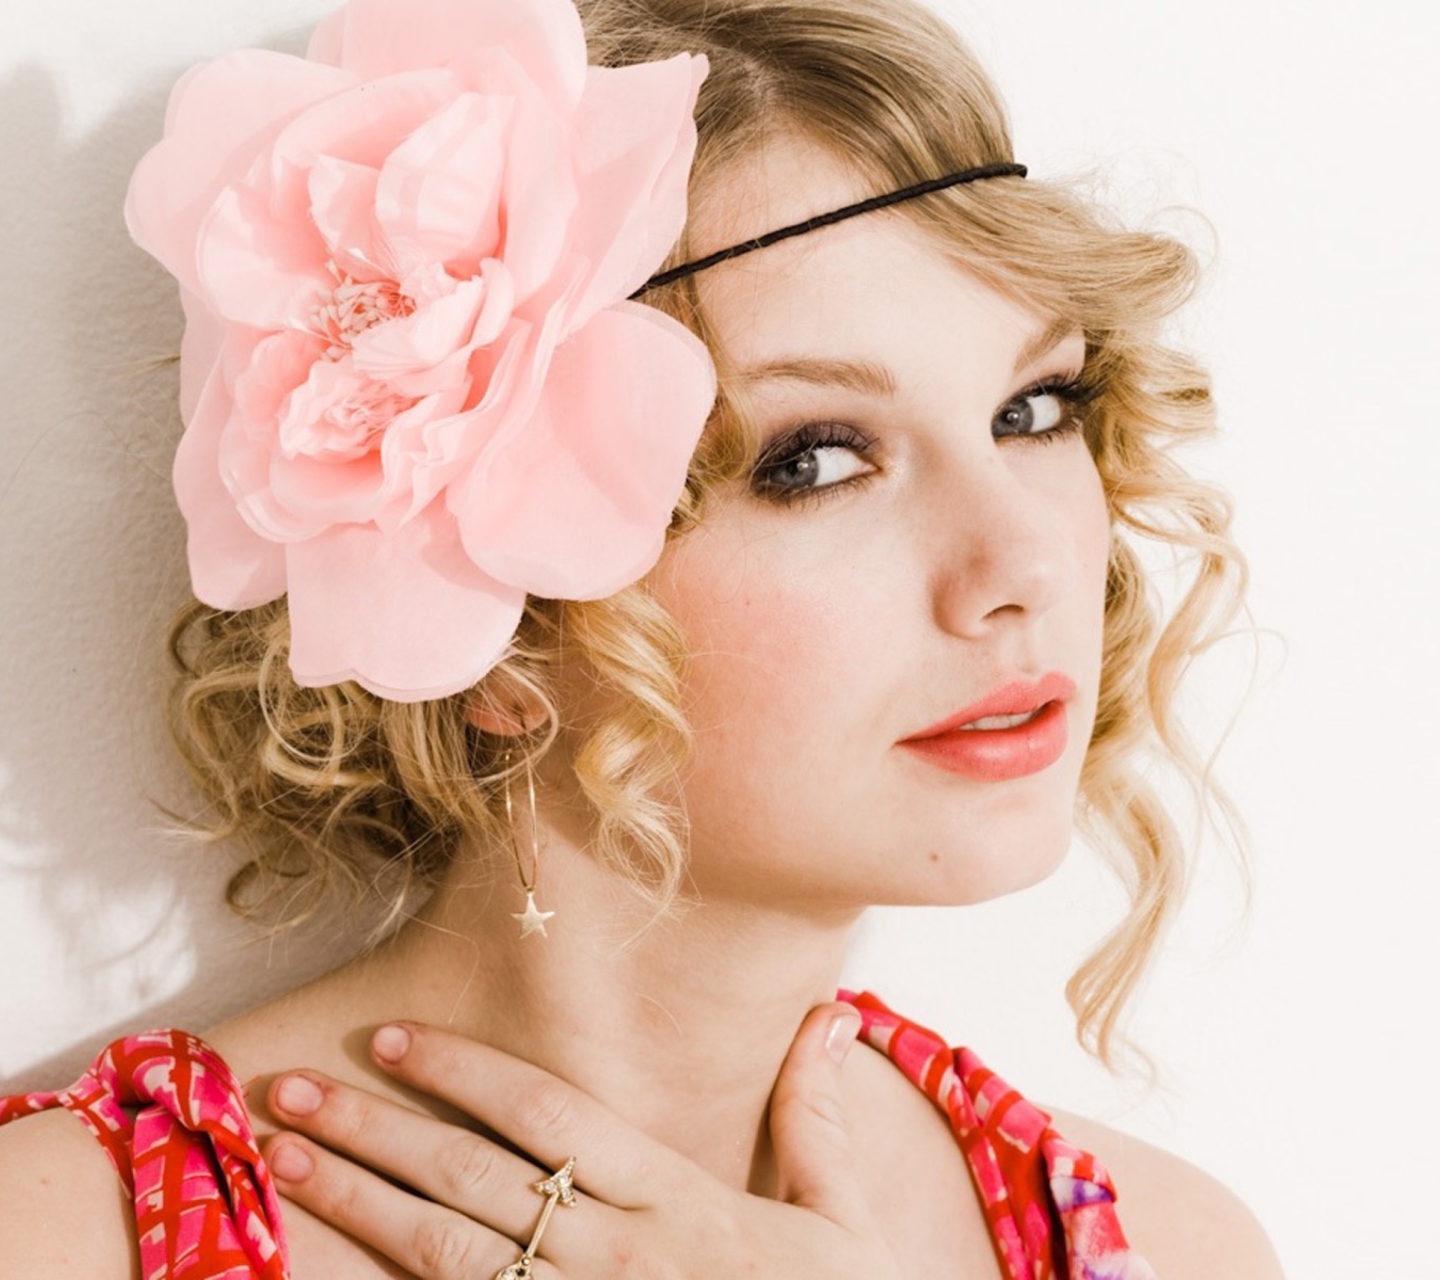 Taylor Swift With Pink Rose On Head screenshot #1 1440x1280